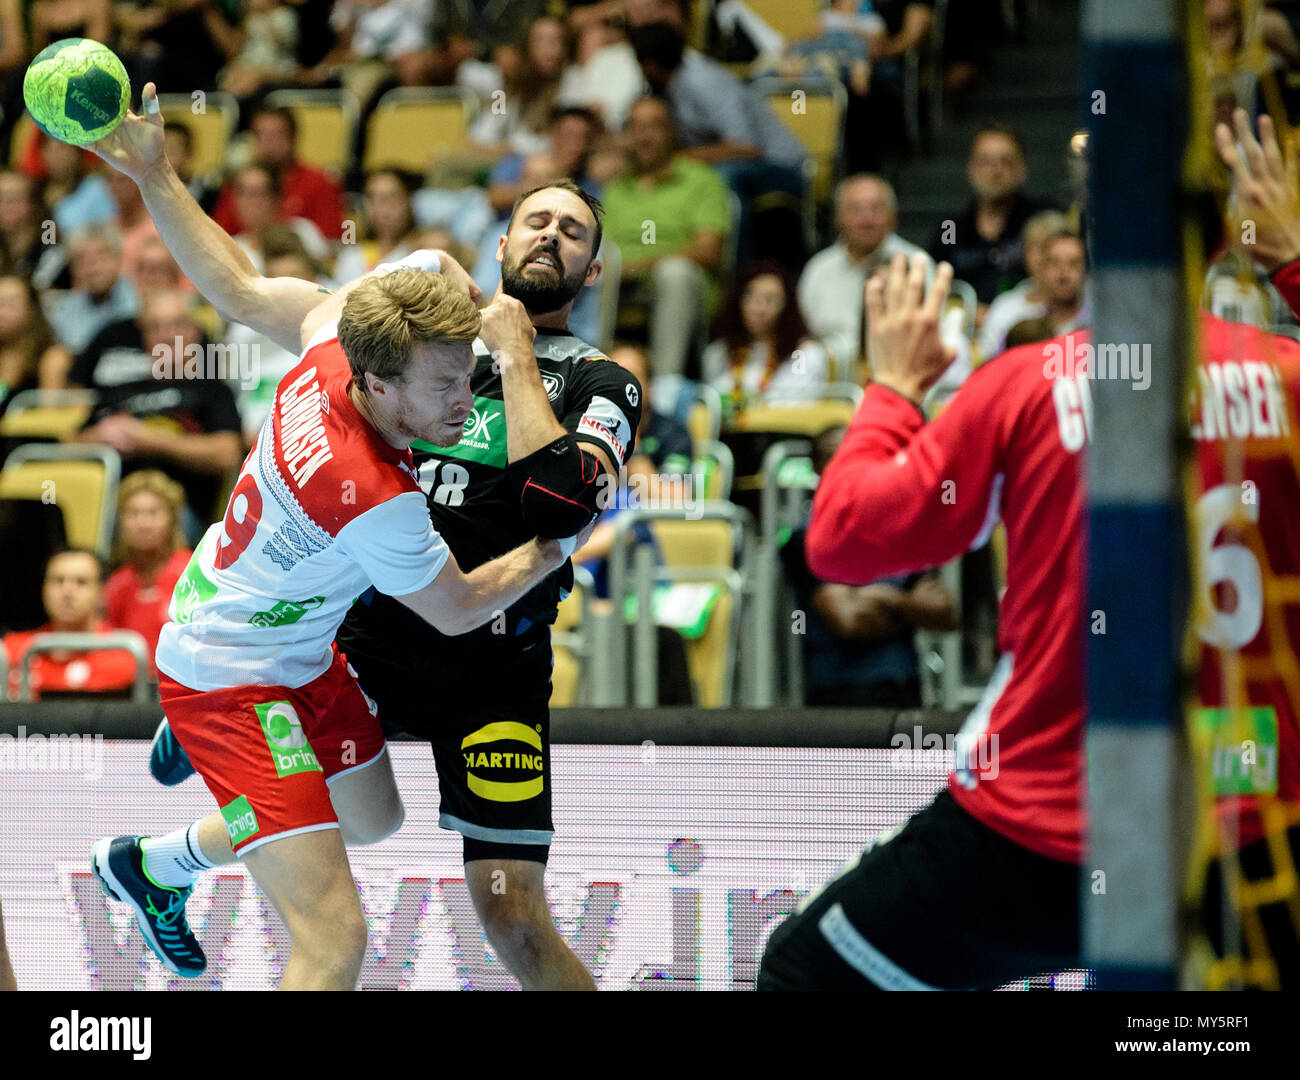 06 June 2018, Germany, Munich: Handball, men, international match, Germany vs Norway in the Olympic Hall. Germany's Tim Kneule (R) fighting for the ball against Norway's Kristian Björnsen. On the right is Norway's goalkeeper Espen Christensen. Photo: Matthias Balk/dpa Stock Photo